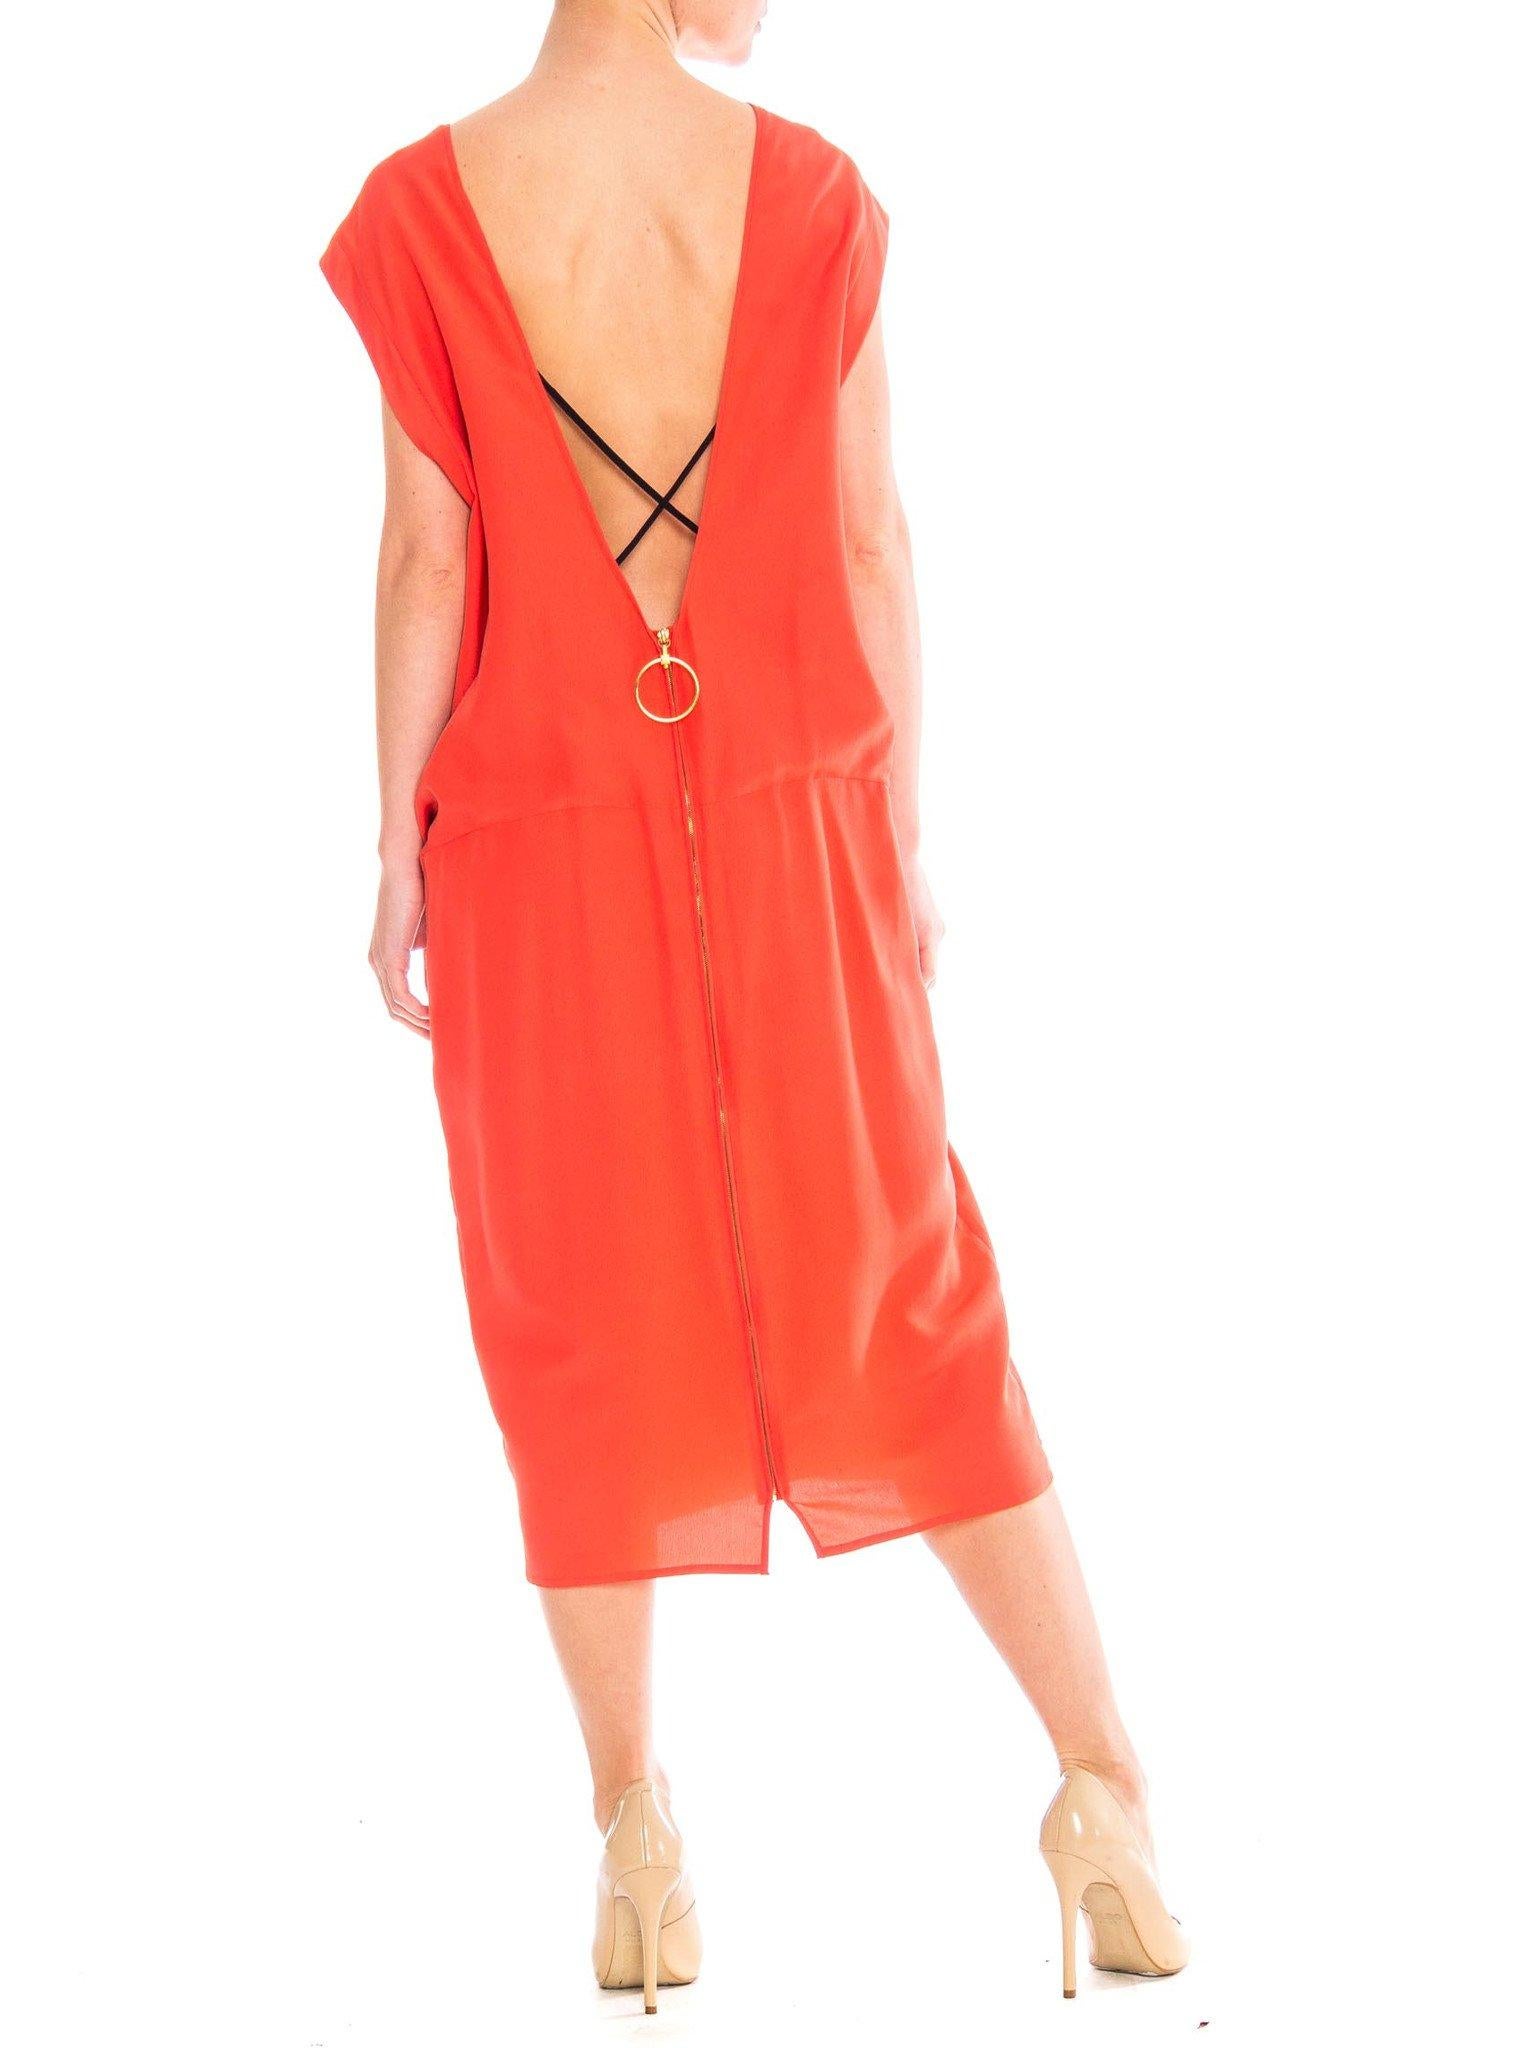 1980 GIANFRANCO FERRE Coral Light Weight Silk Low Back Minimalist Dress For Sale 1